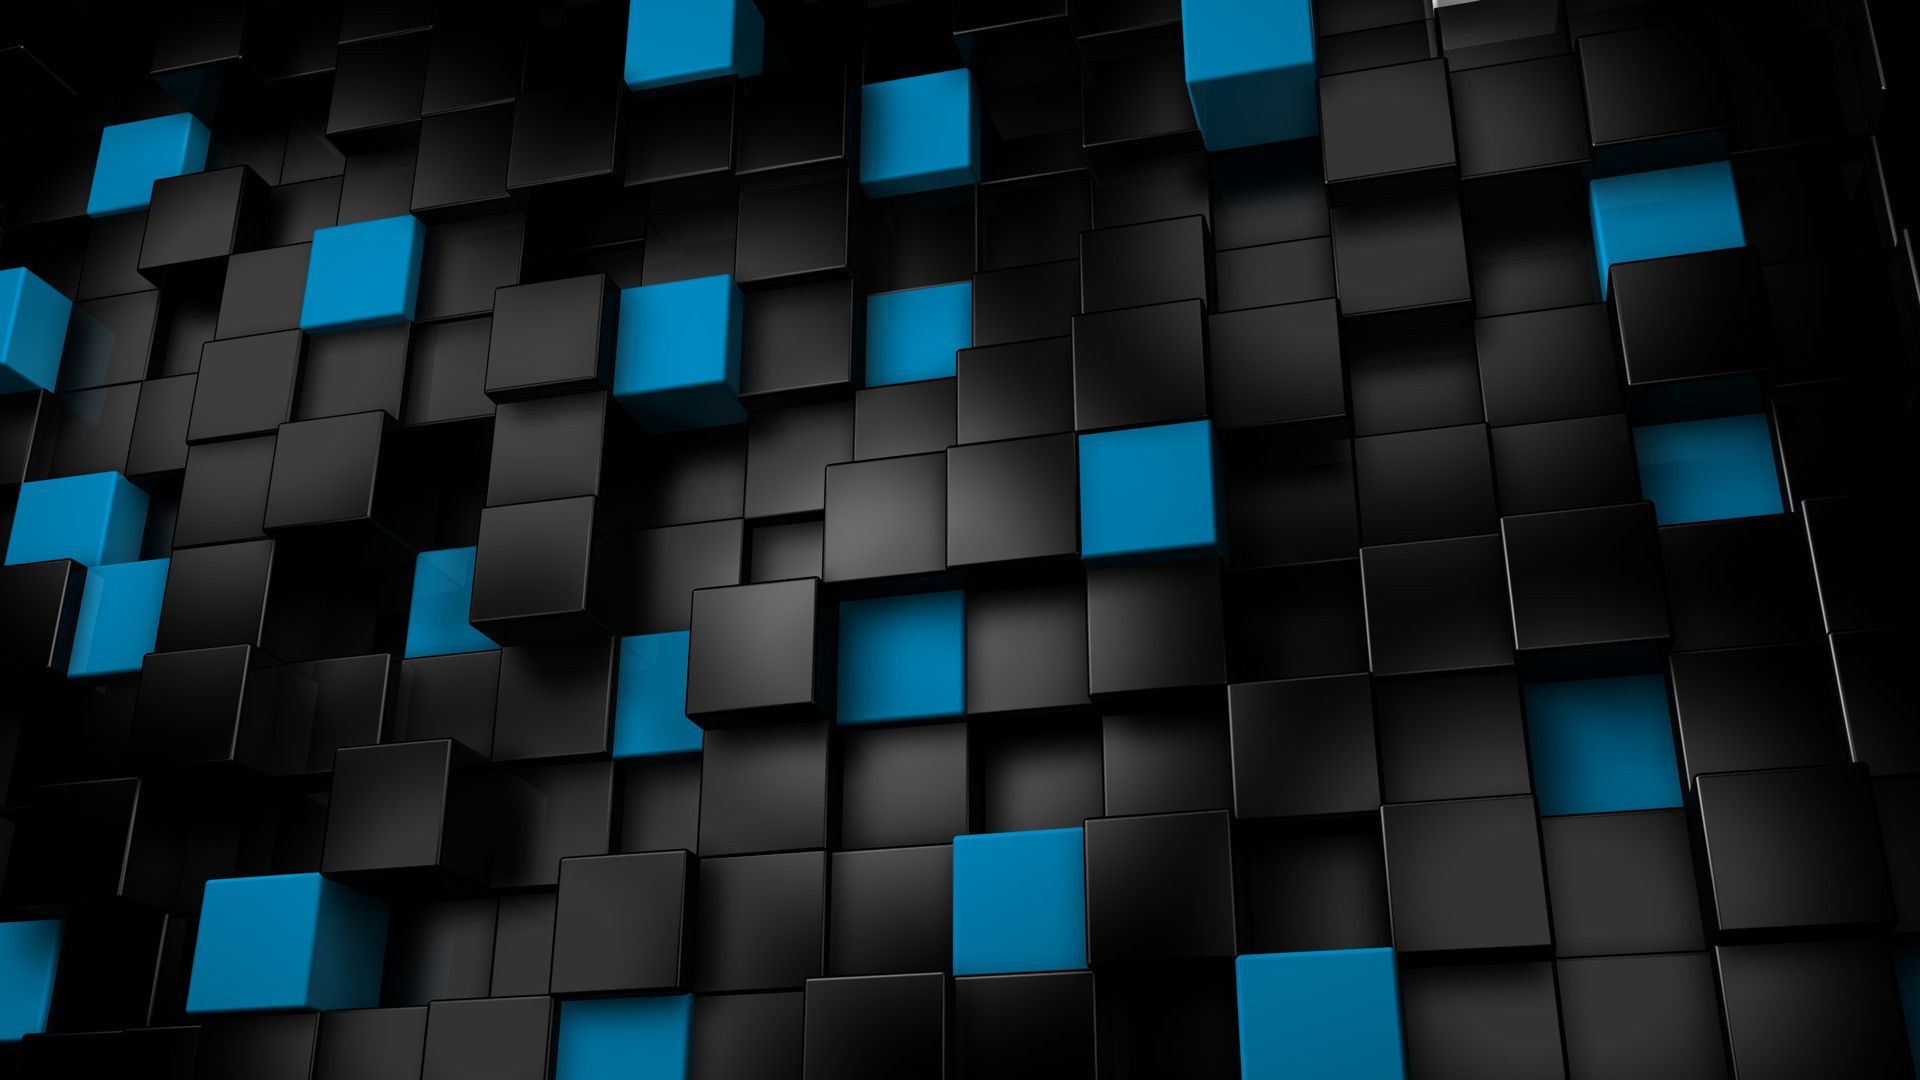 3D Cube Wallpaper Free 3D Cube Background